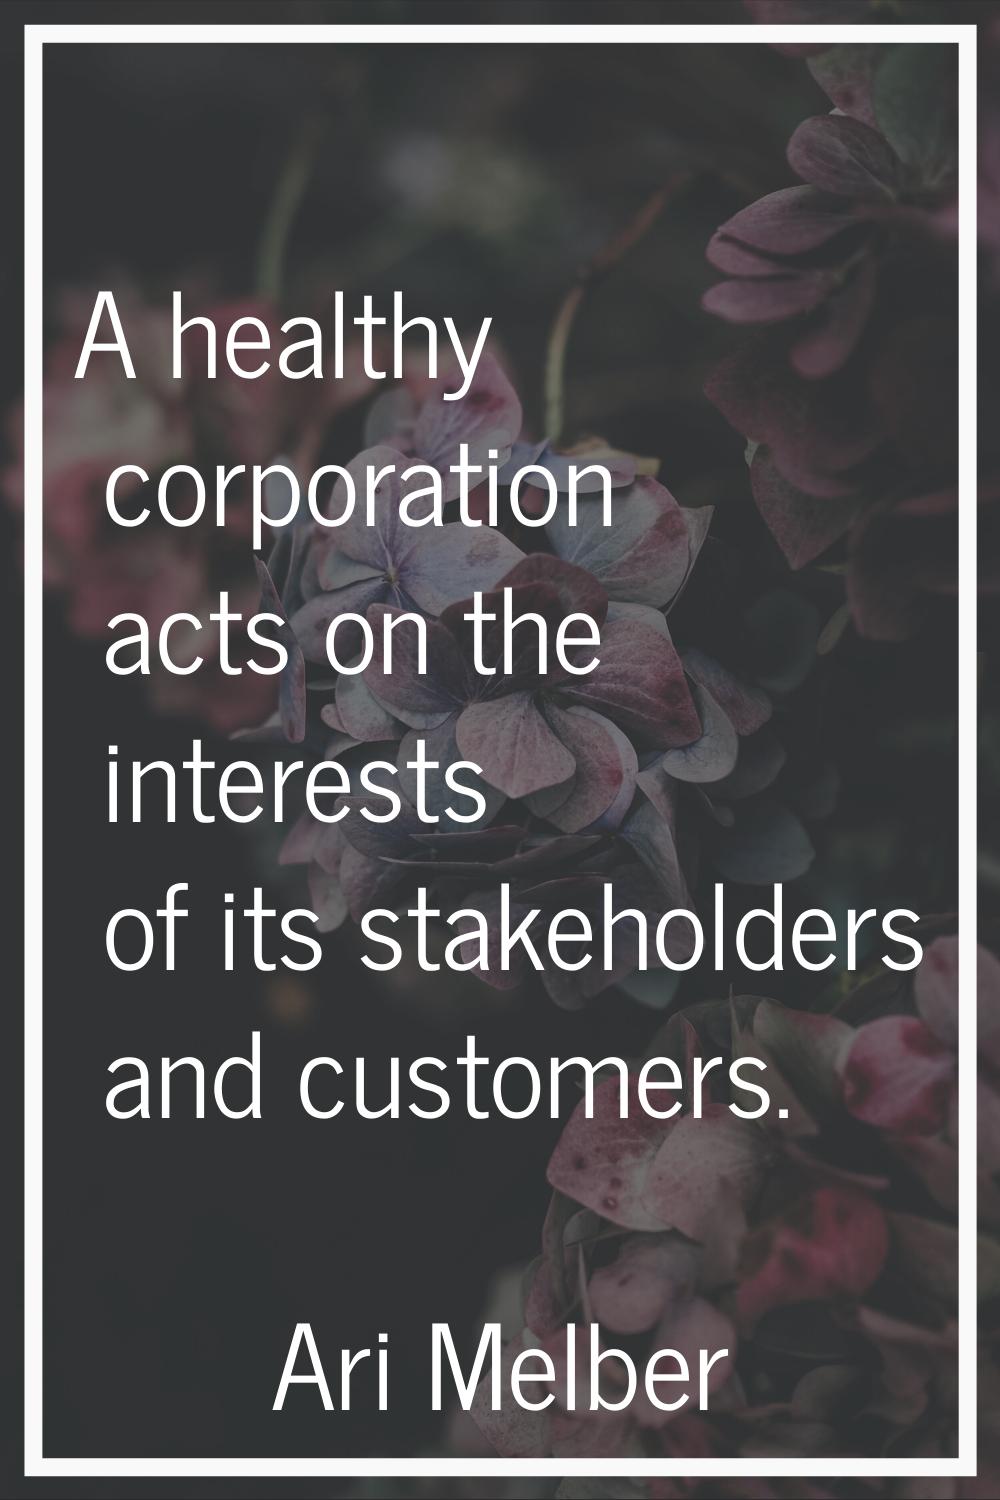 A healthy corporation acts on the interests of its stakeholders and customers.